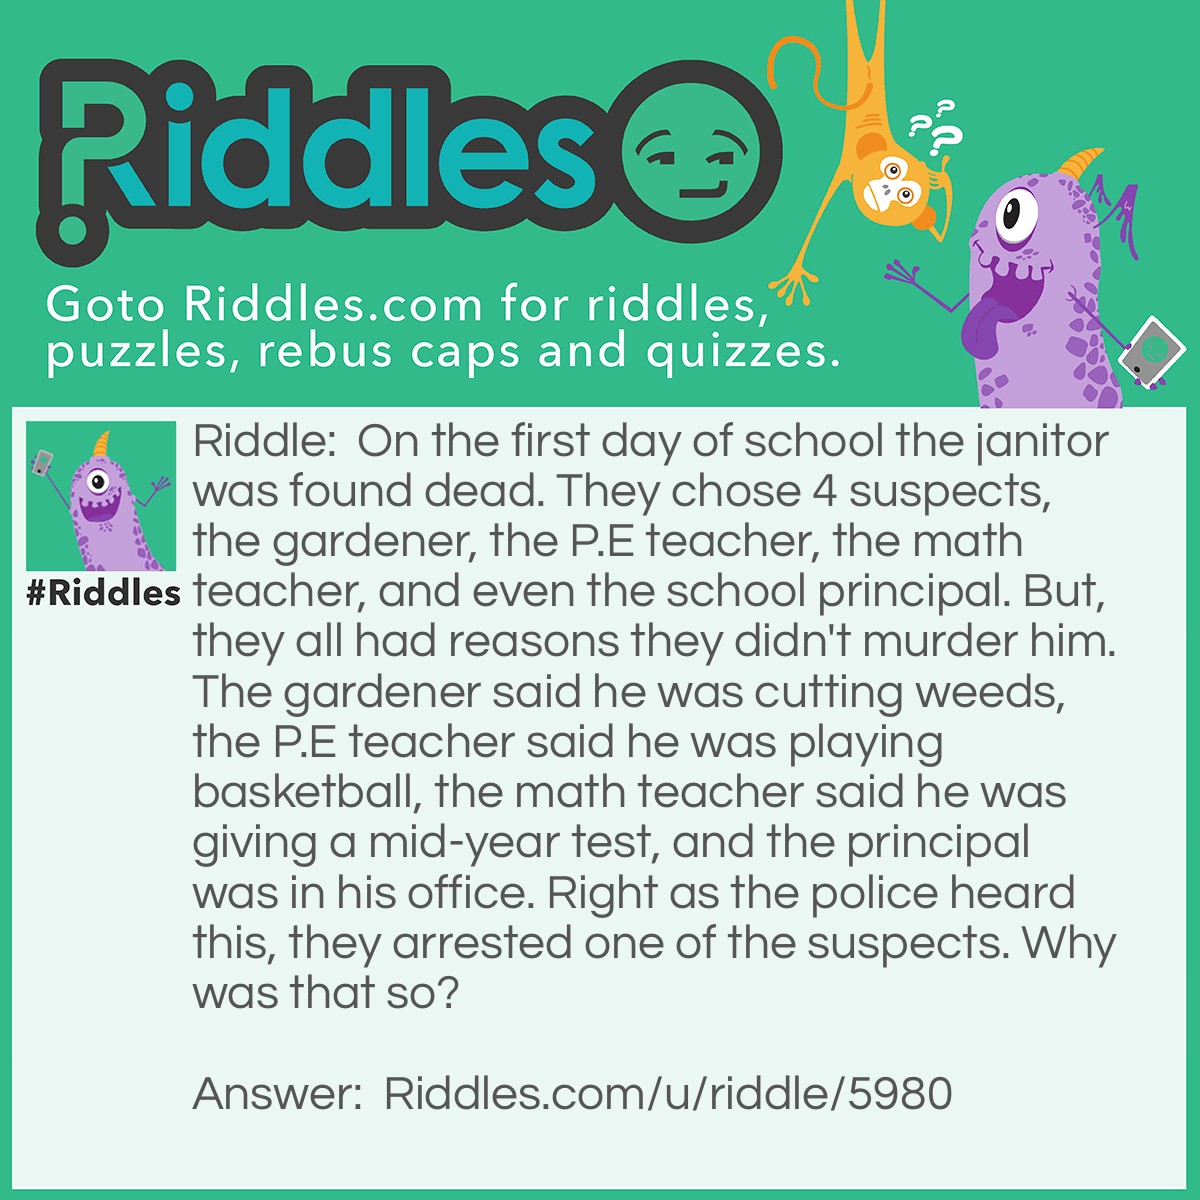 Riddle: On the first day of school the janitor was found dead. They chose 4 suspects, the gardener, the P.E teacher, the math teacher, and even the school principal. But, they all had reasons they didn't murder him. The gardener said he was cutting weeds, the P.E teacher said he was playing basketball, the math teacher said he was giving a mid-year test, and the principal was in his office. Right as the police heard this, they arrested one of the suspects. Why was that so? Answer: The math teacher said he was giving a mid-year test while it was just the beginning of the year.